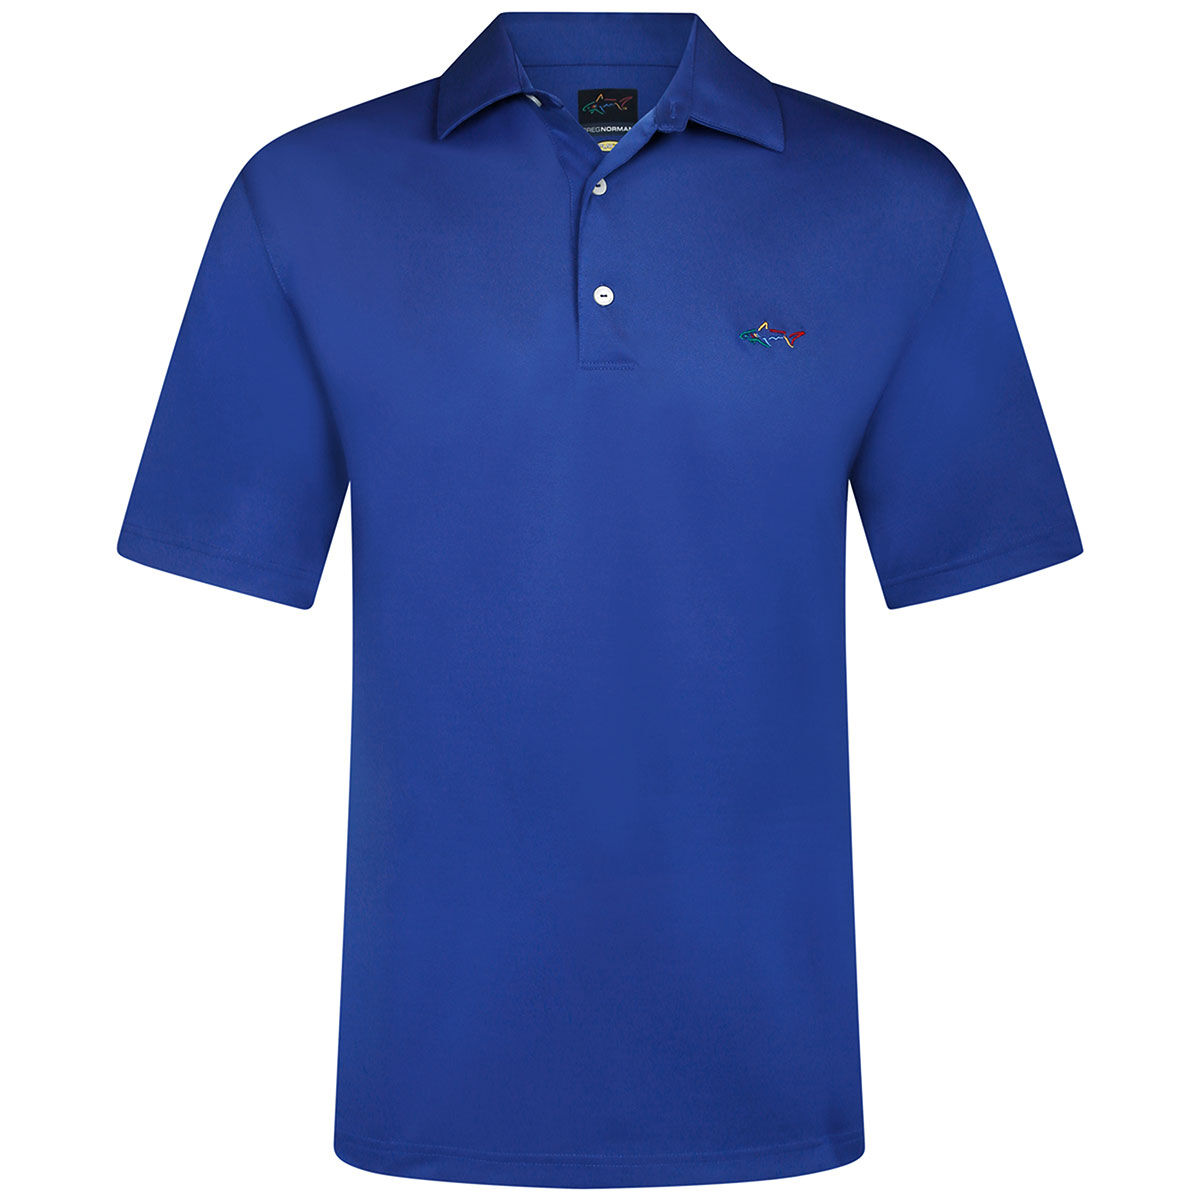 Greg Norman Blue Embroidered Shark Logo Golf Polo Shirt, Mens, Maritime | American Golf, Size: Small - Father's Day Gift von Greg Norman